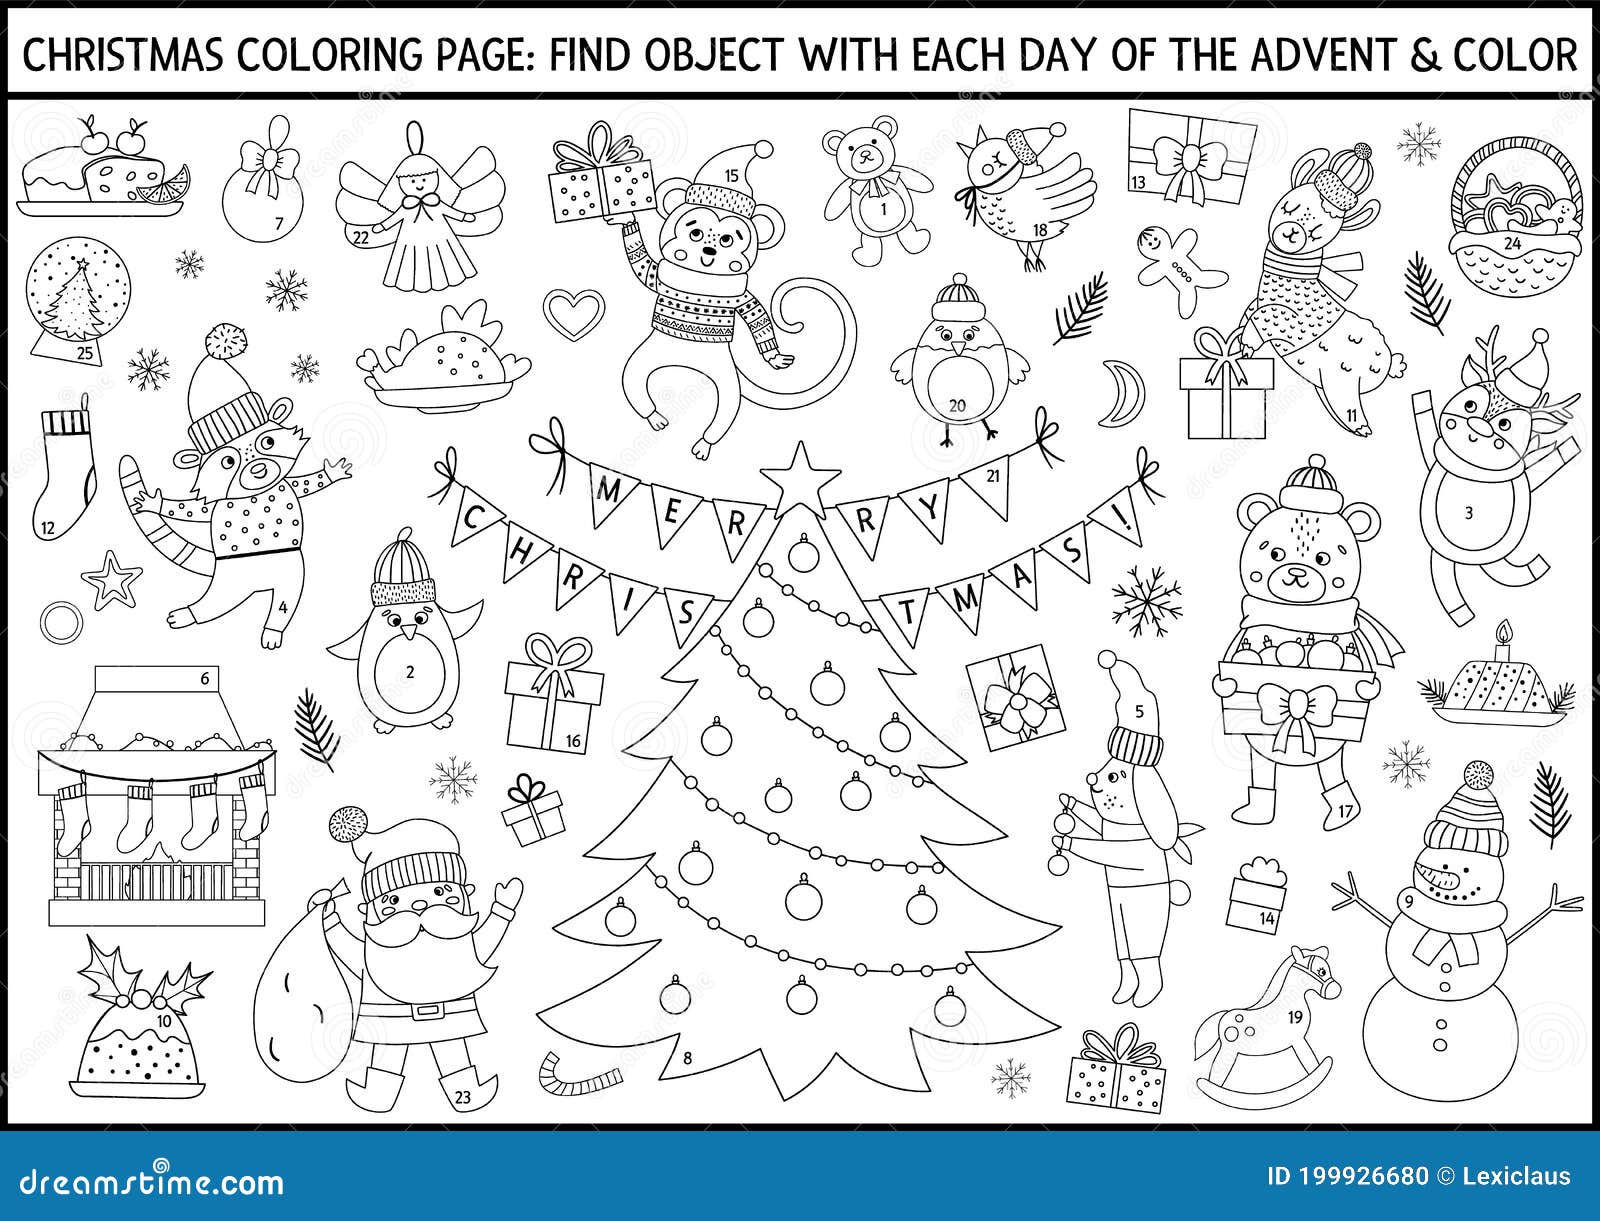 Vector Black and White Christmas Coloring Page and Advent Calendar ...